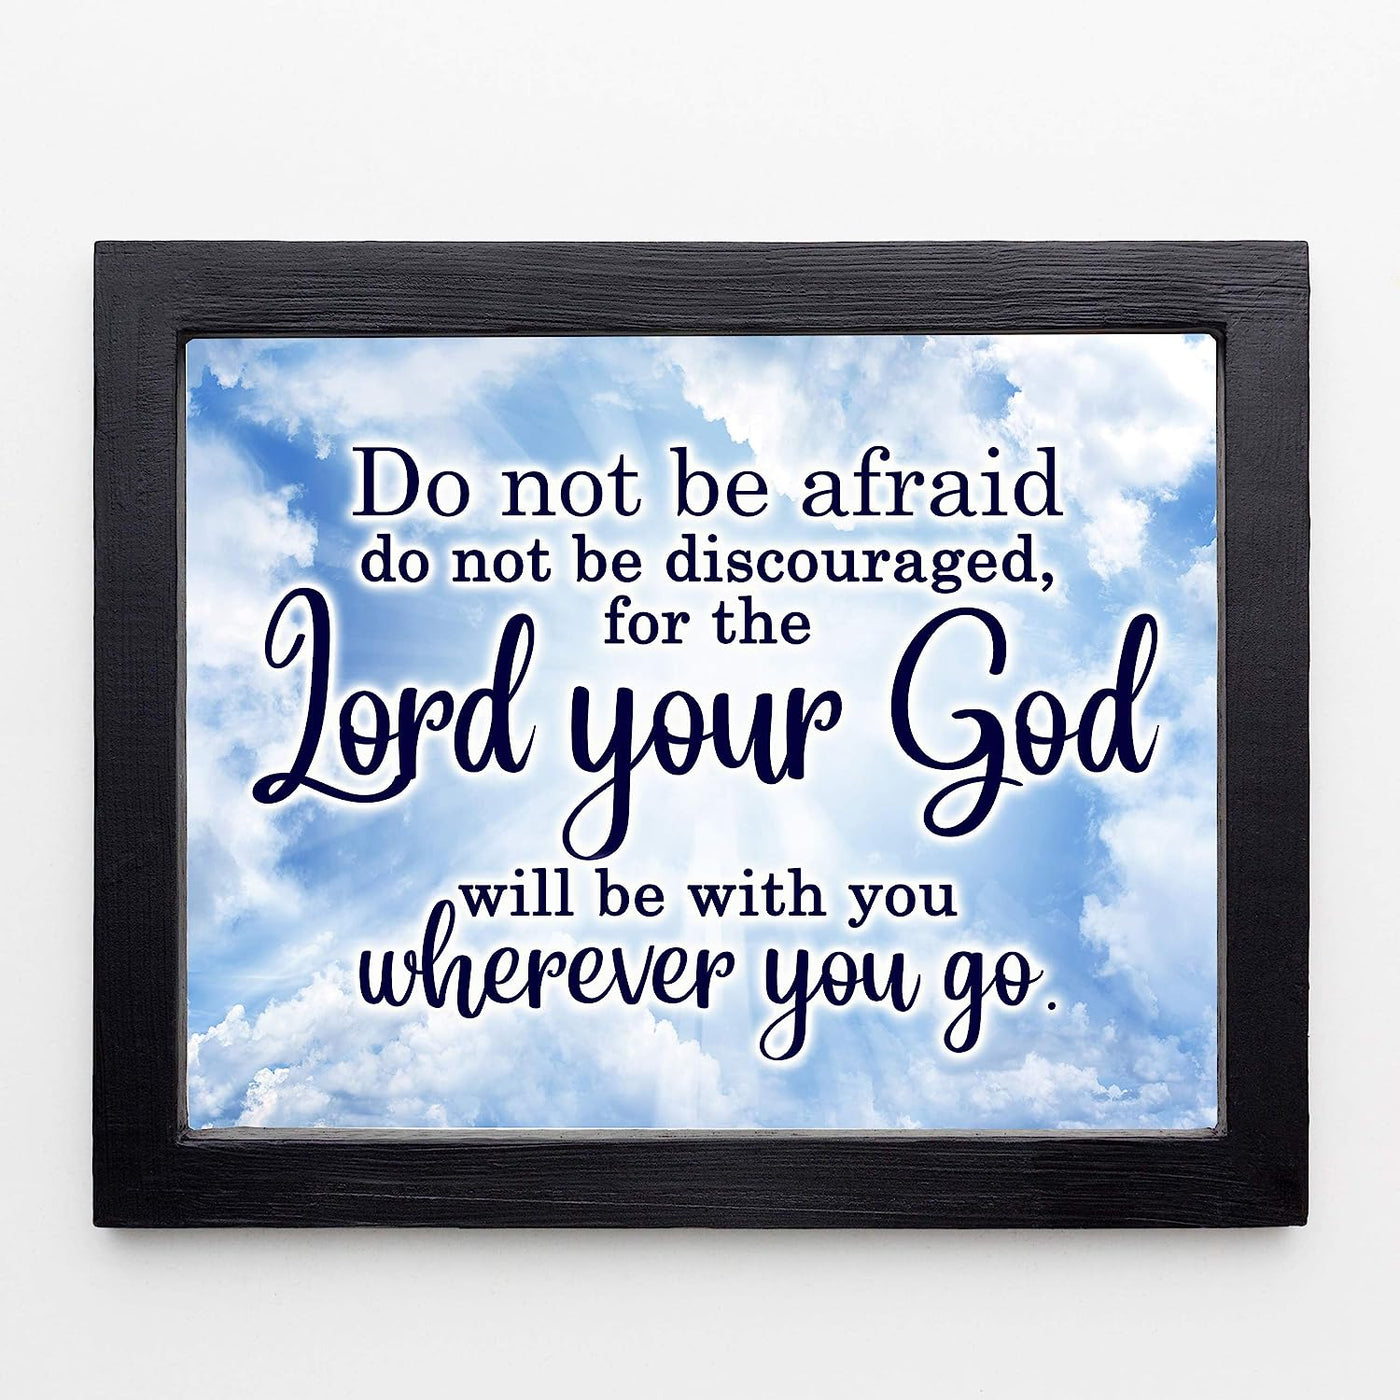 The Lord Your God Will Be With You Inspirational Quotes Wall Art Decor-10 x 8" Christian Poster Print-Ready to Frame. Motivational Home-Office-Farmhouse-Church Decor. Great Religious Gift of Faith!